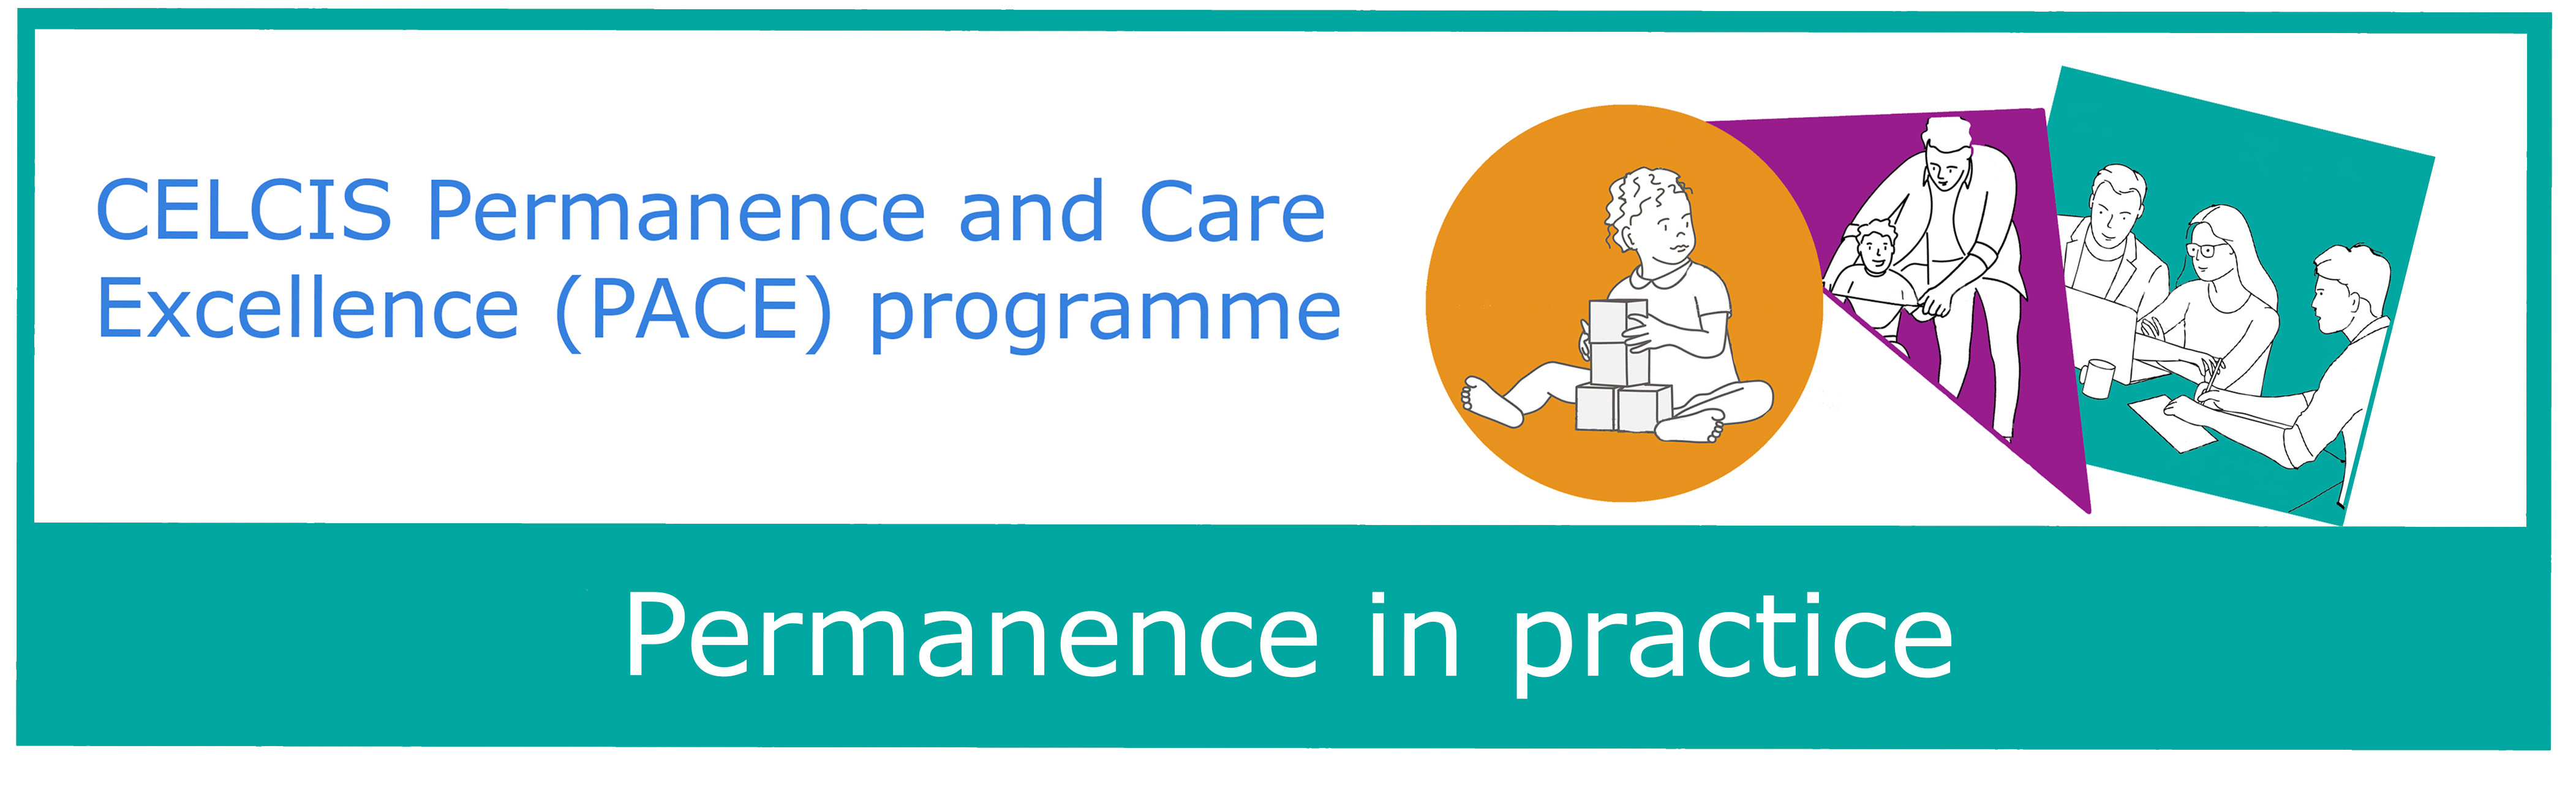 Pace banner - Permanence in practice